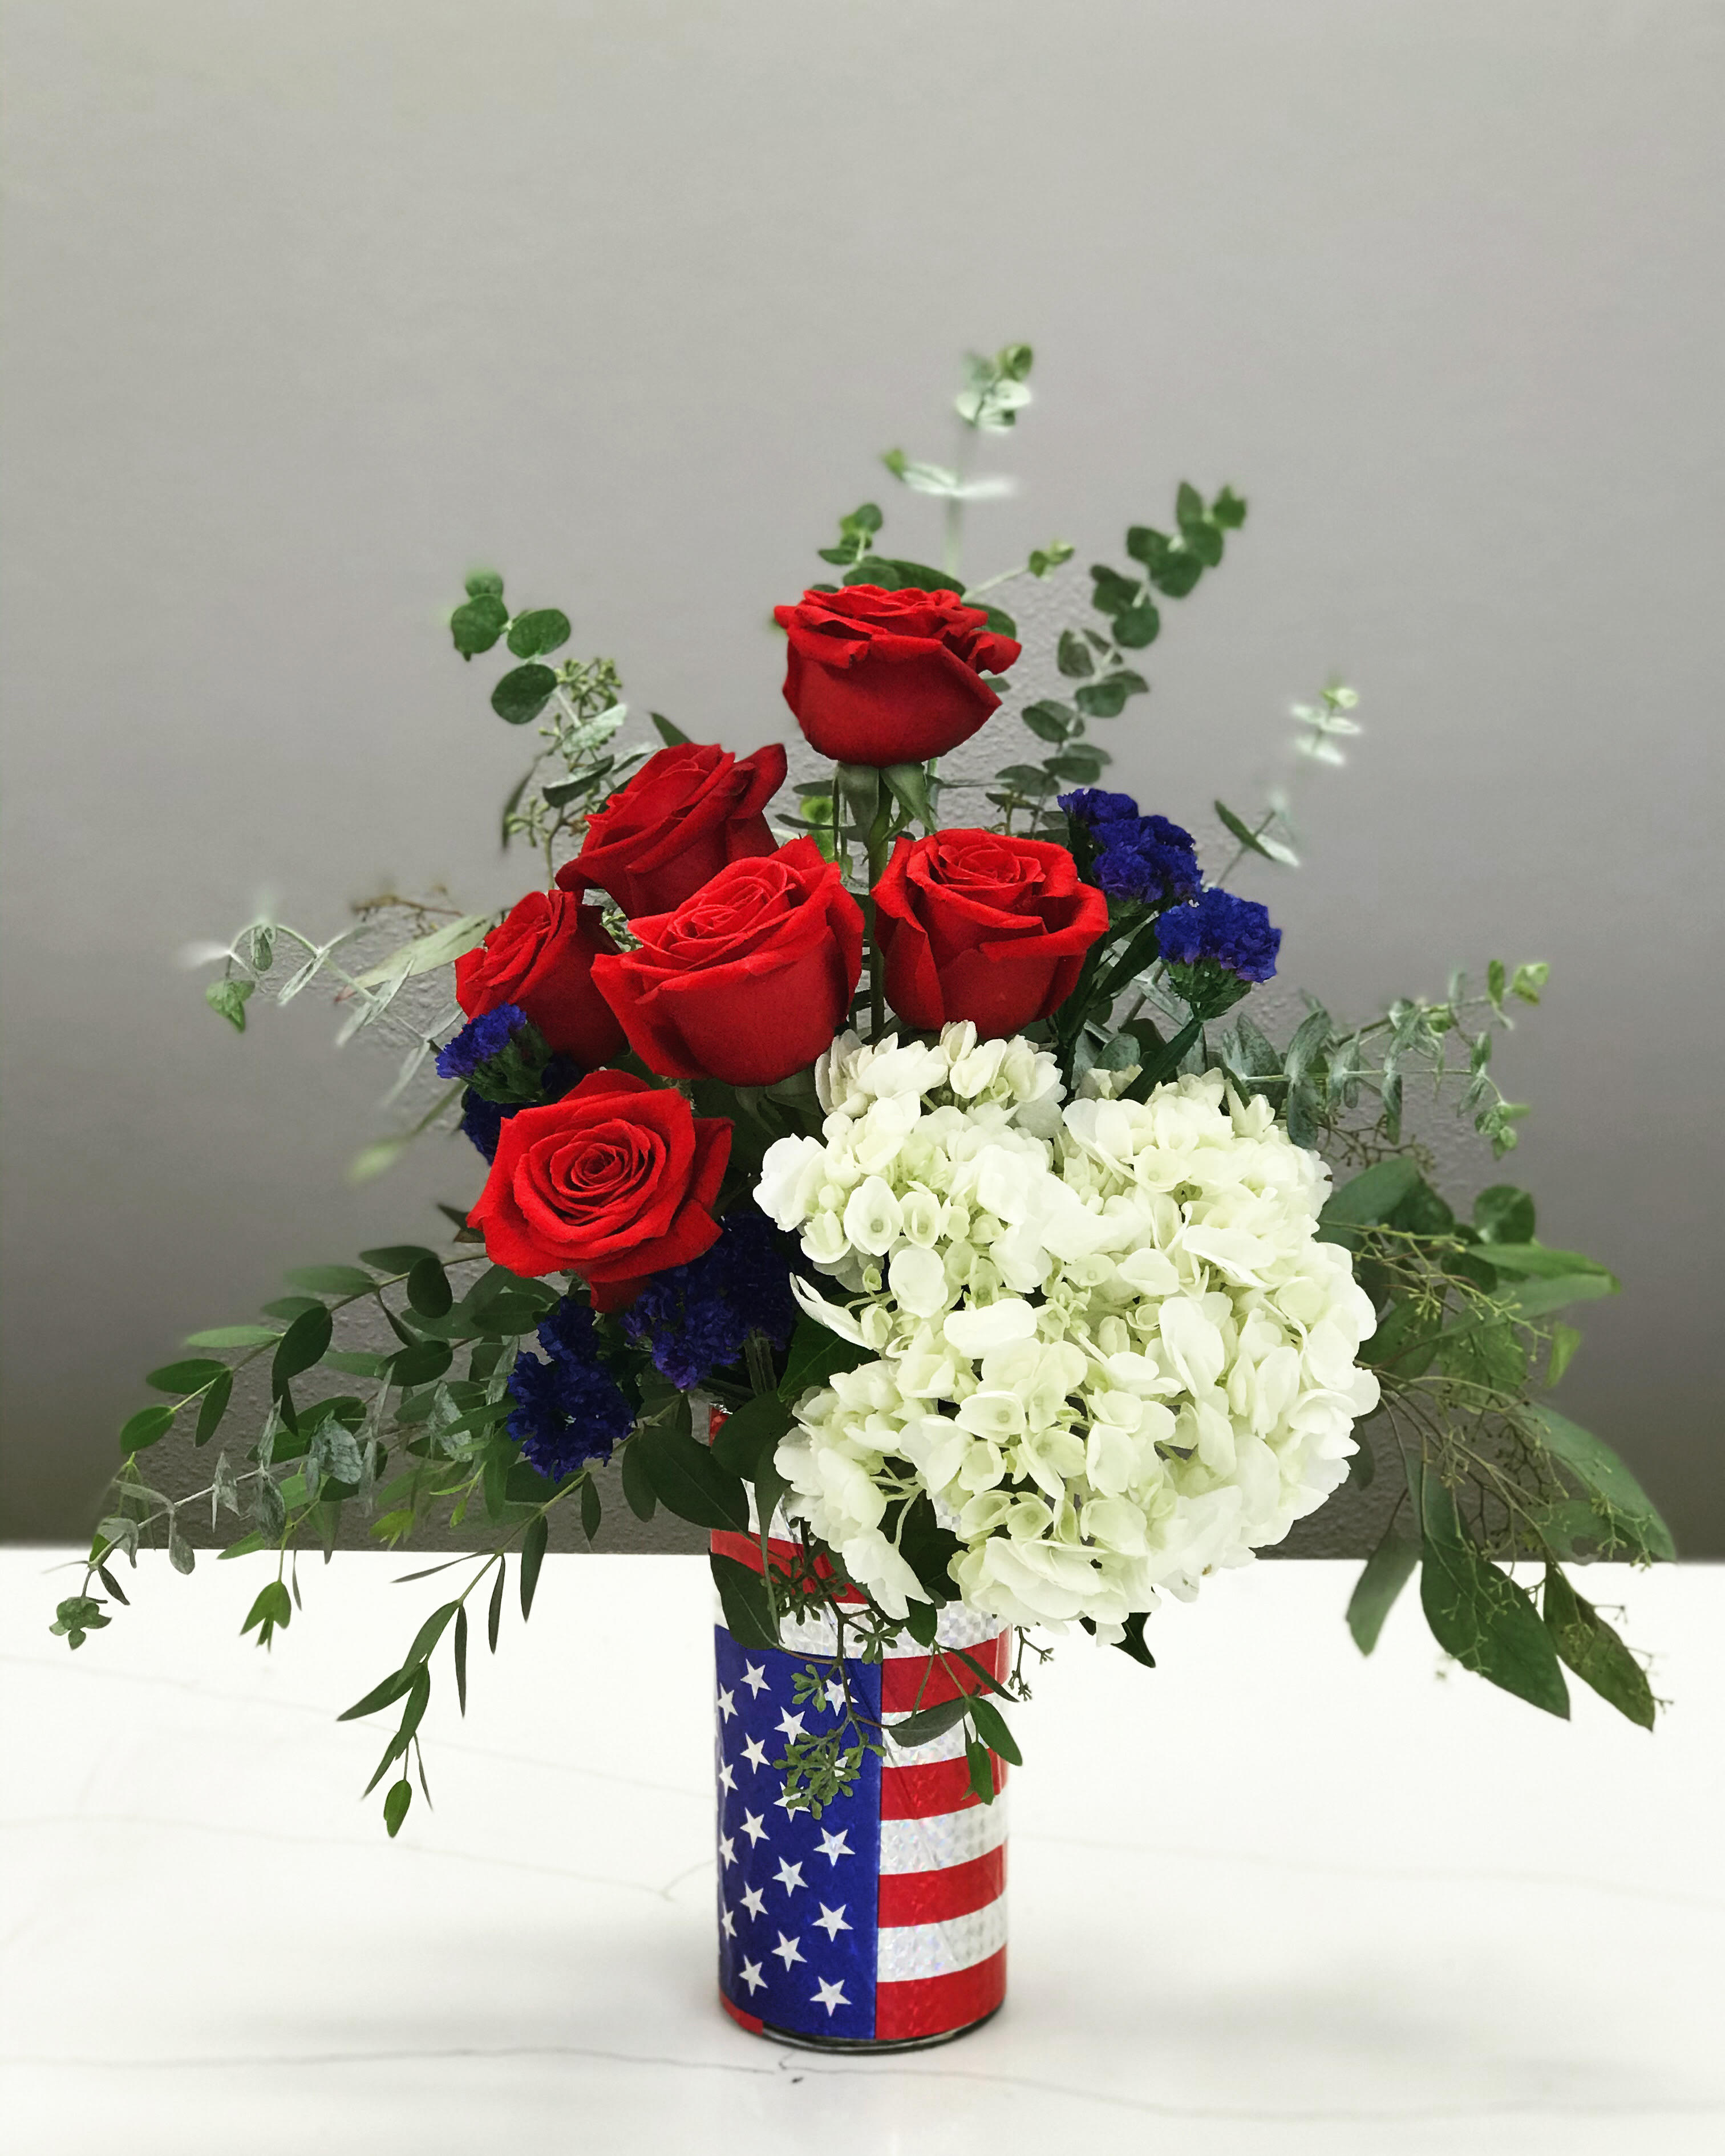 Freedom Rings - Celebrating America's Birthday with flowers of Red, White, and Blue!! Happy 4th of July!